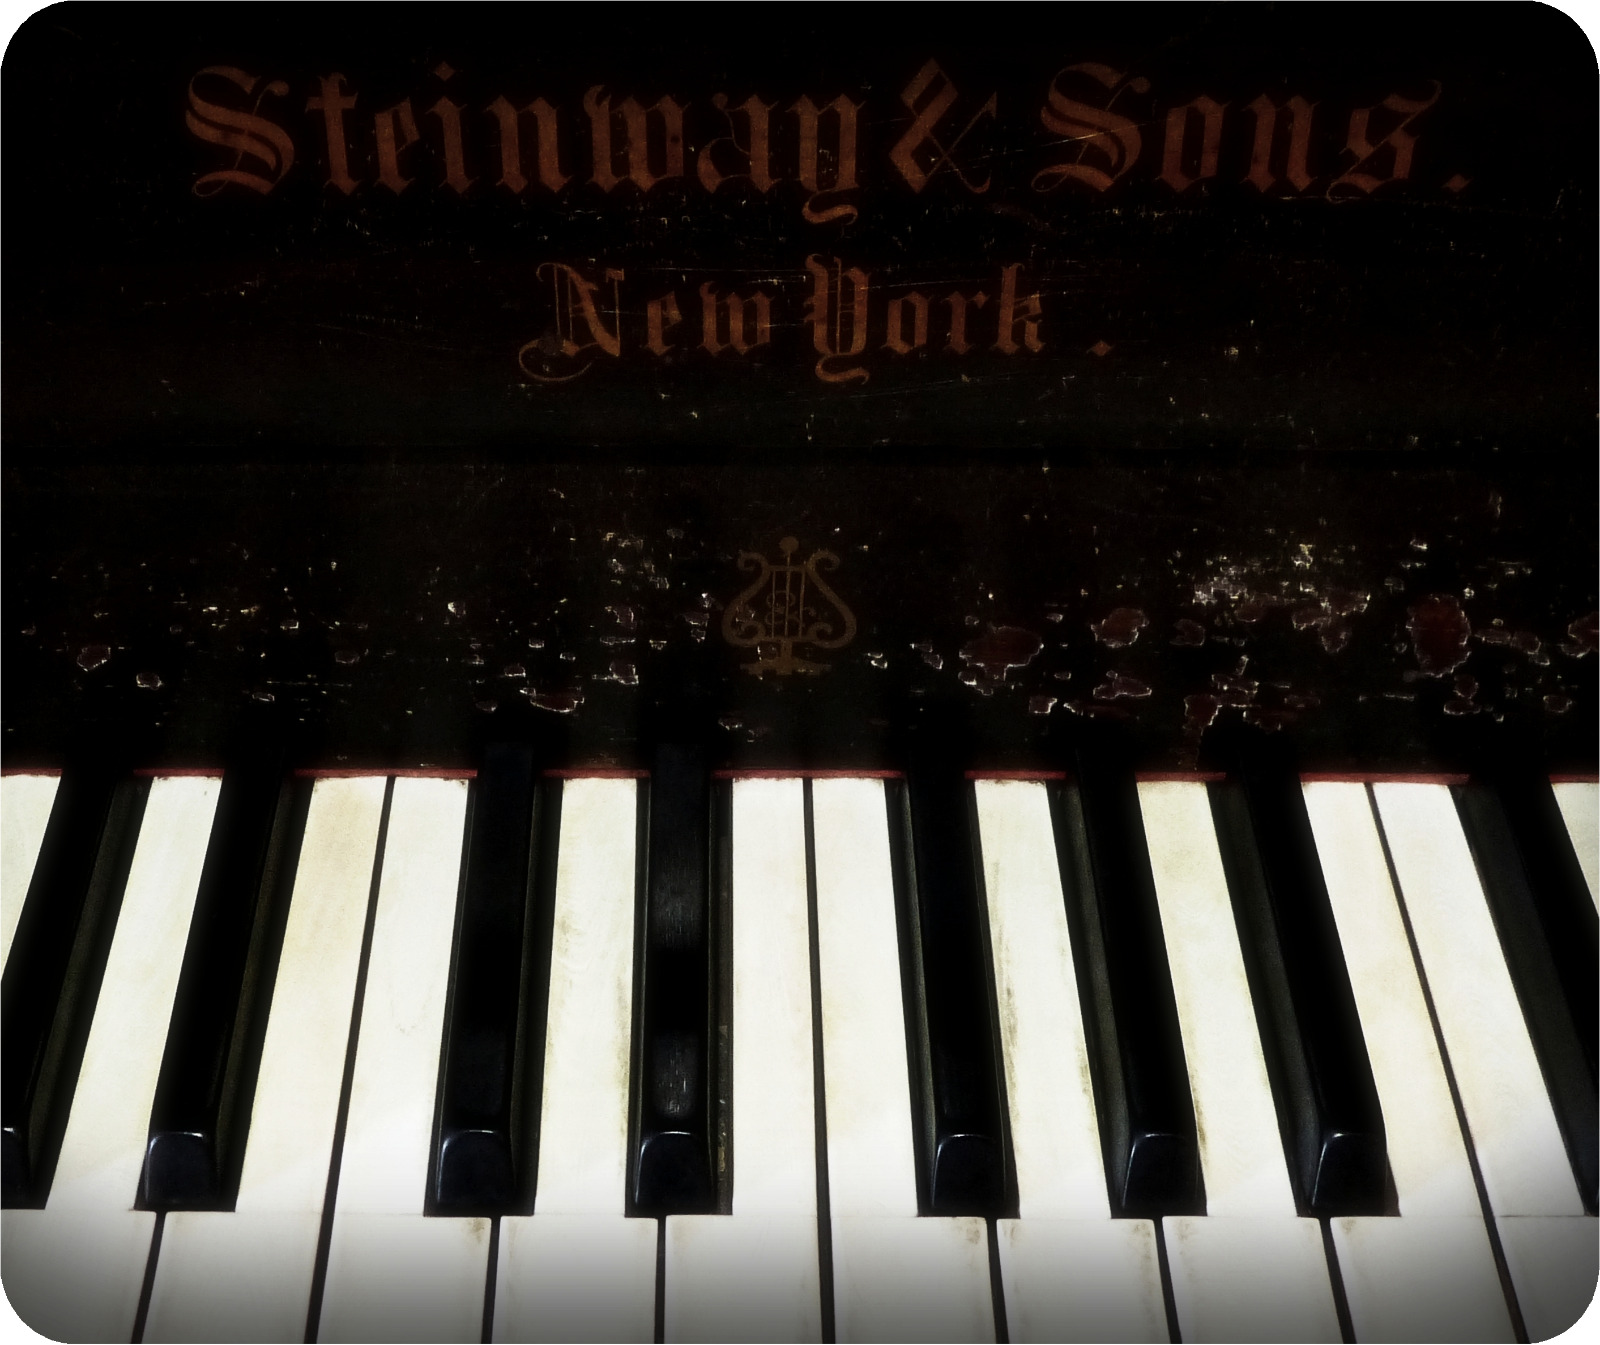 STEINWAY SONS CLASSIC VINTAGE PIANO UNIQUE RECTANGULAR MOUSE PAD GIFT